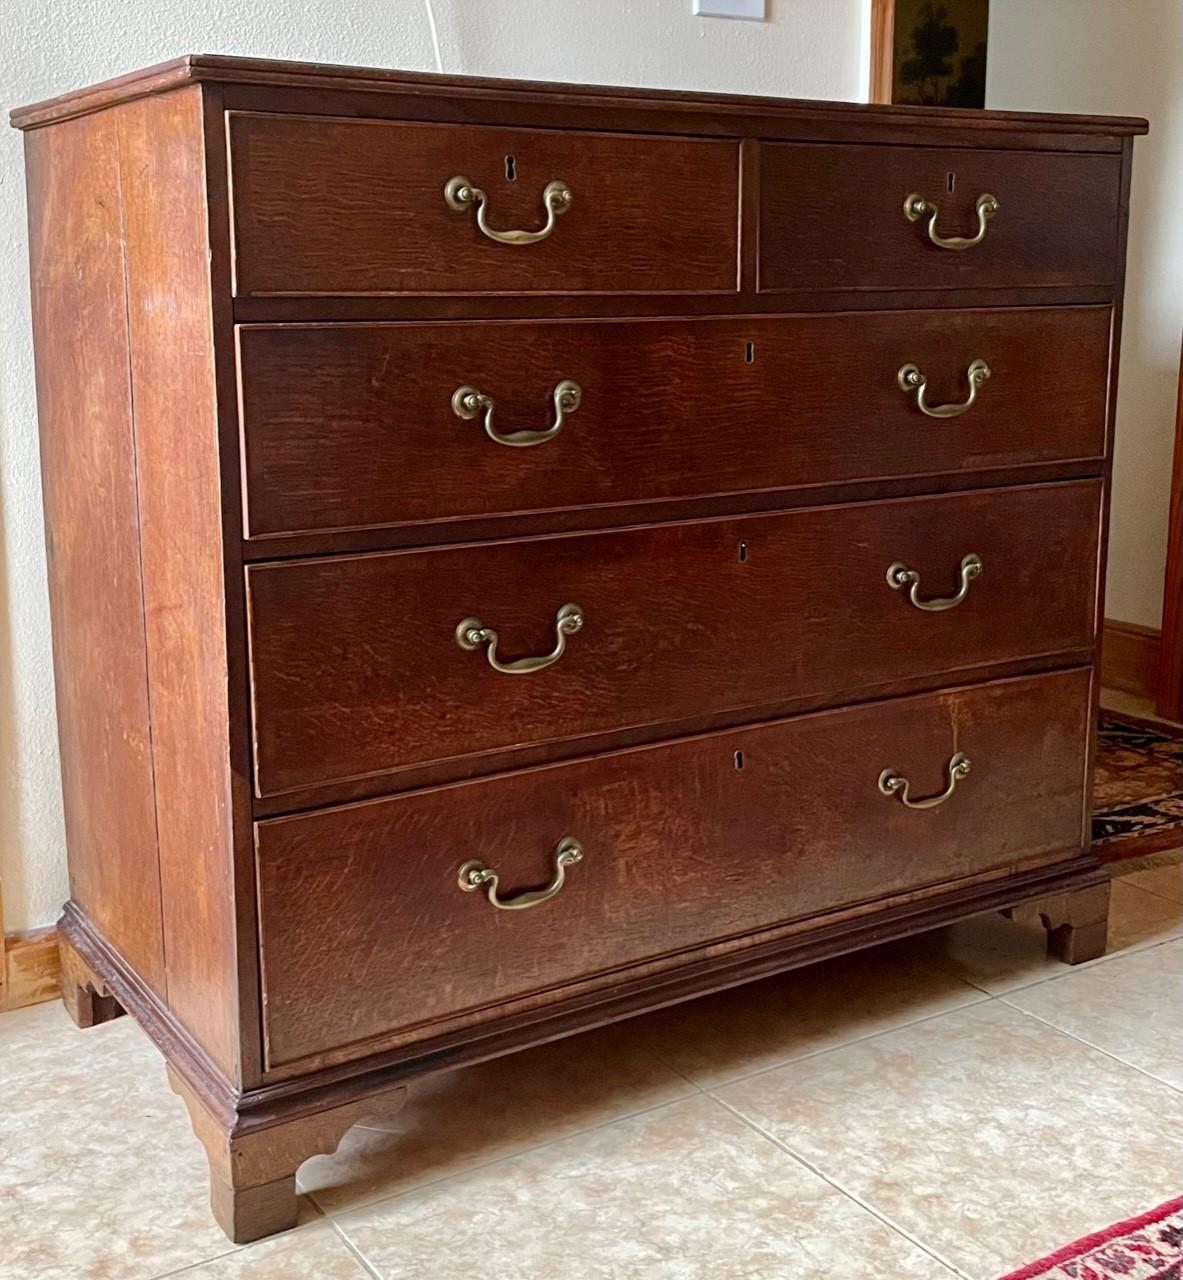 18th Century George lll oak chest of drawers with original hardware.

Original and period 18th century oak chest of drawers. This English chest retains the original brass swan neck handles and original locks. (Key absent) The antique chest is